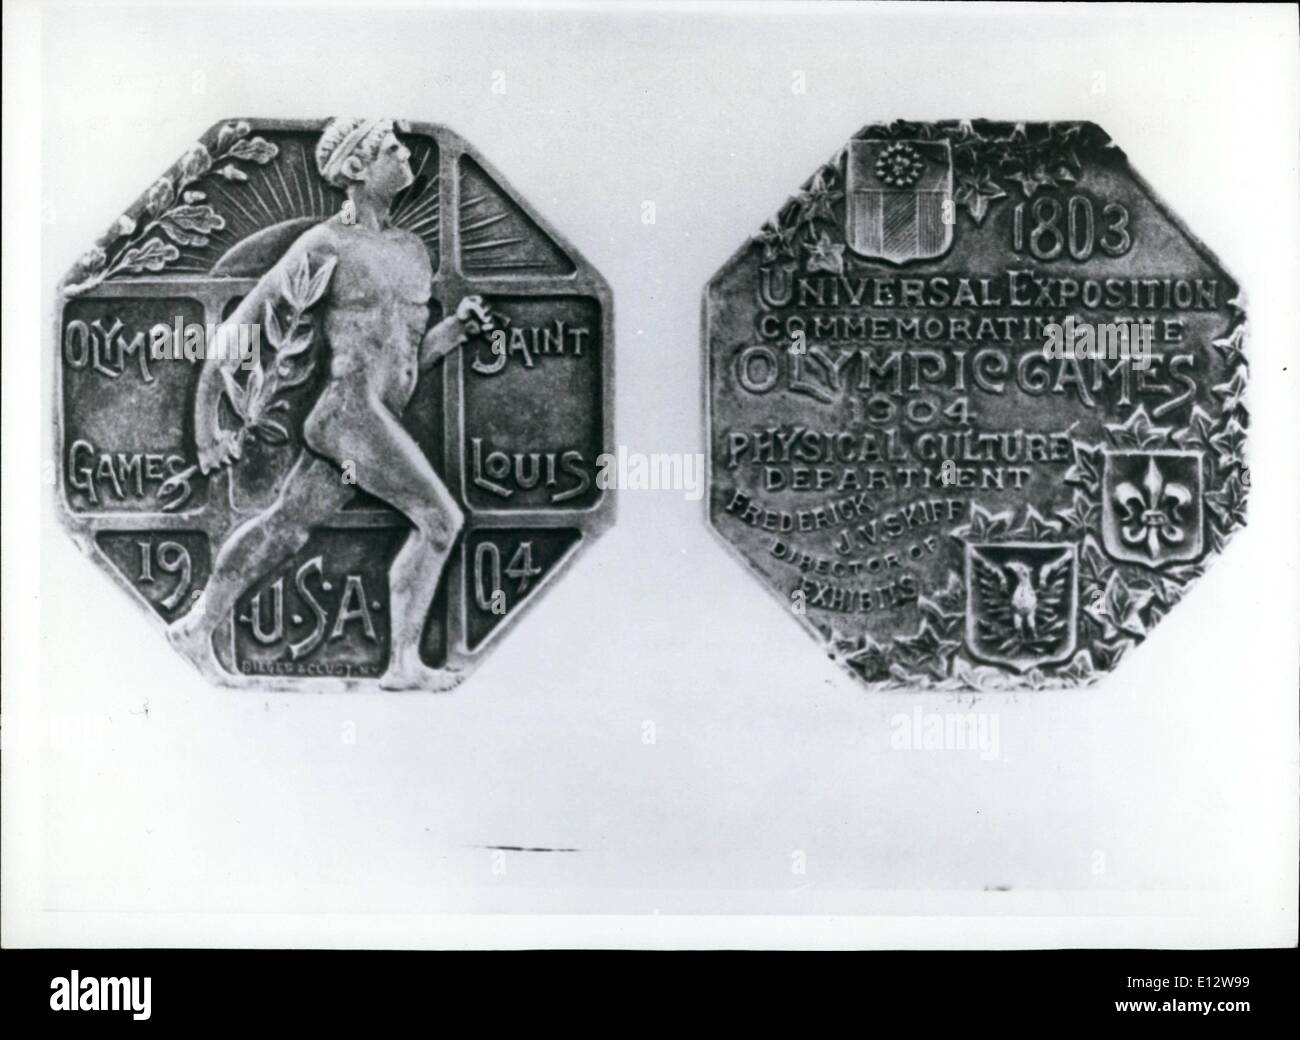 Feb. 25, 2012 - The very first medal for Canada won by the montrealer Etienne Desmarteau at the hammer throw, at the Olympic Games in St. Louis USA, in 1940. Keystone Montreal, Canada. Stock Photo